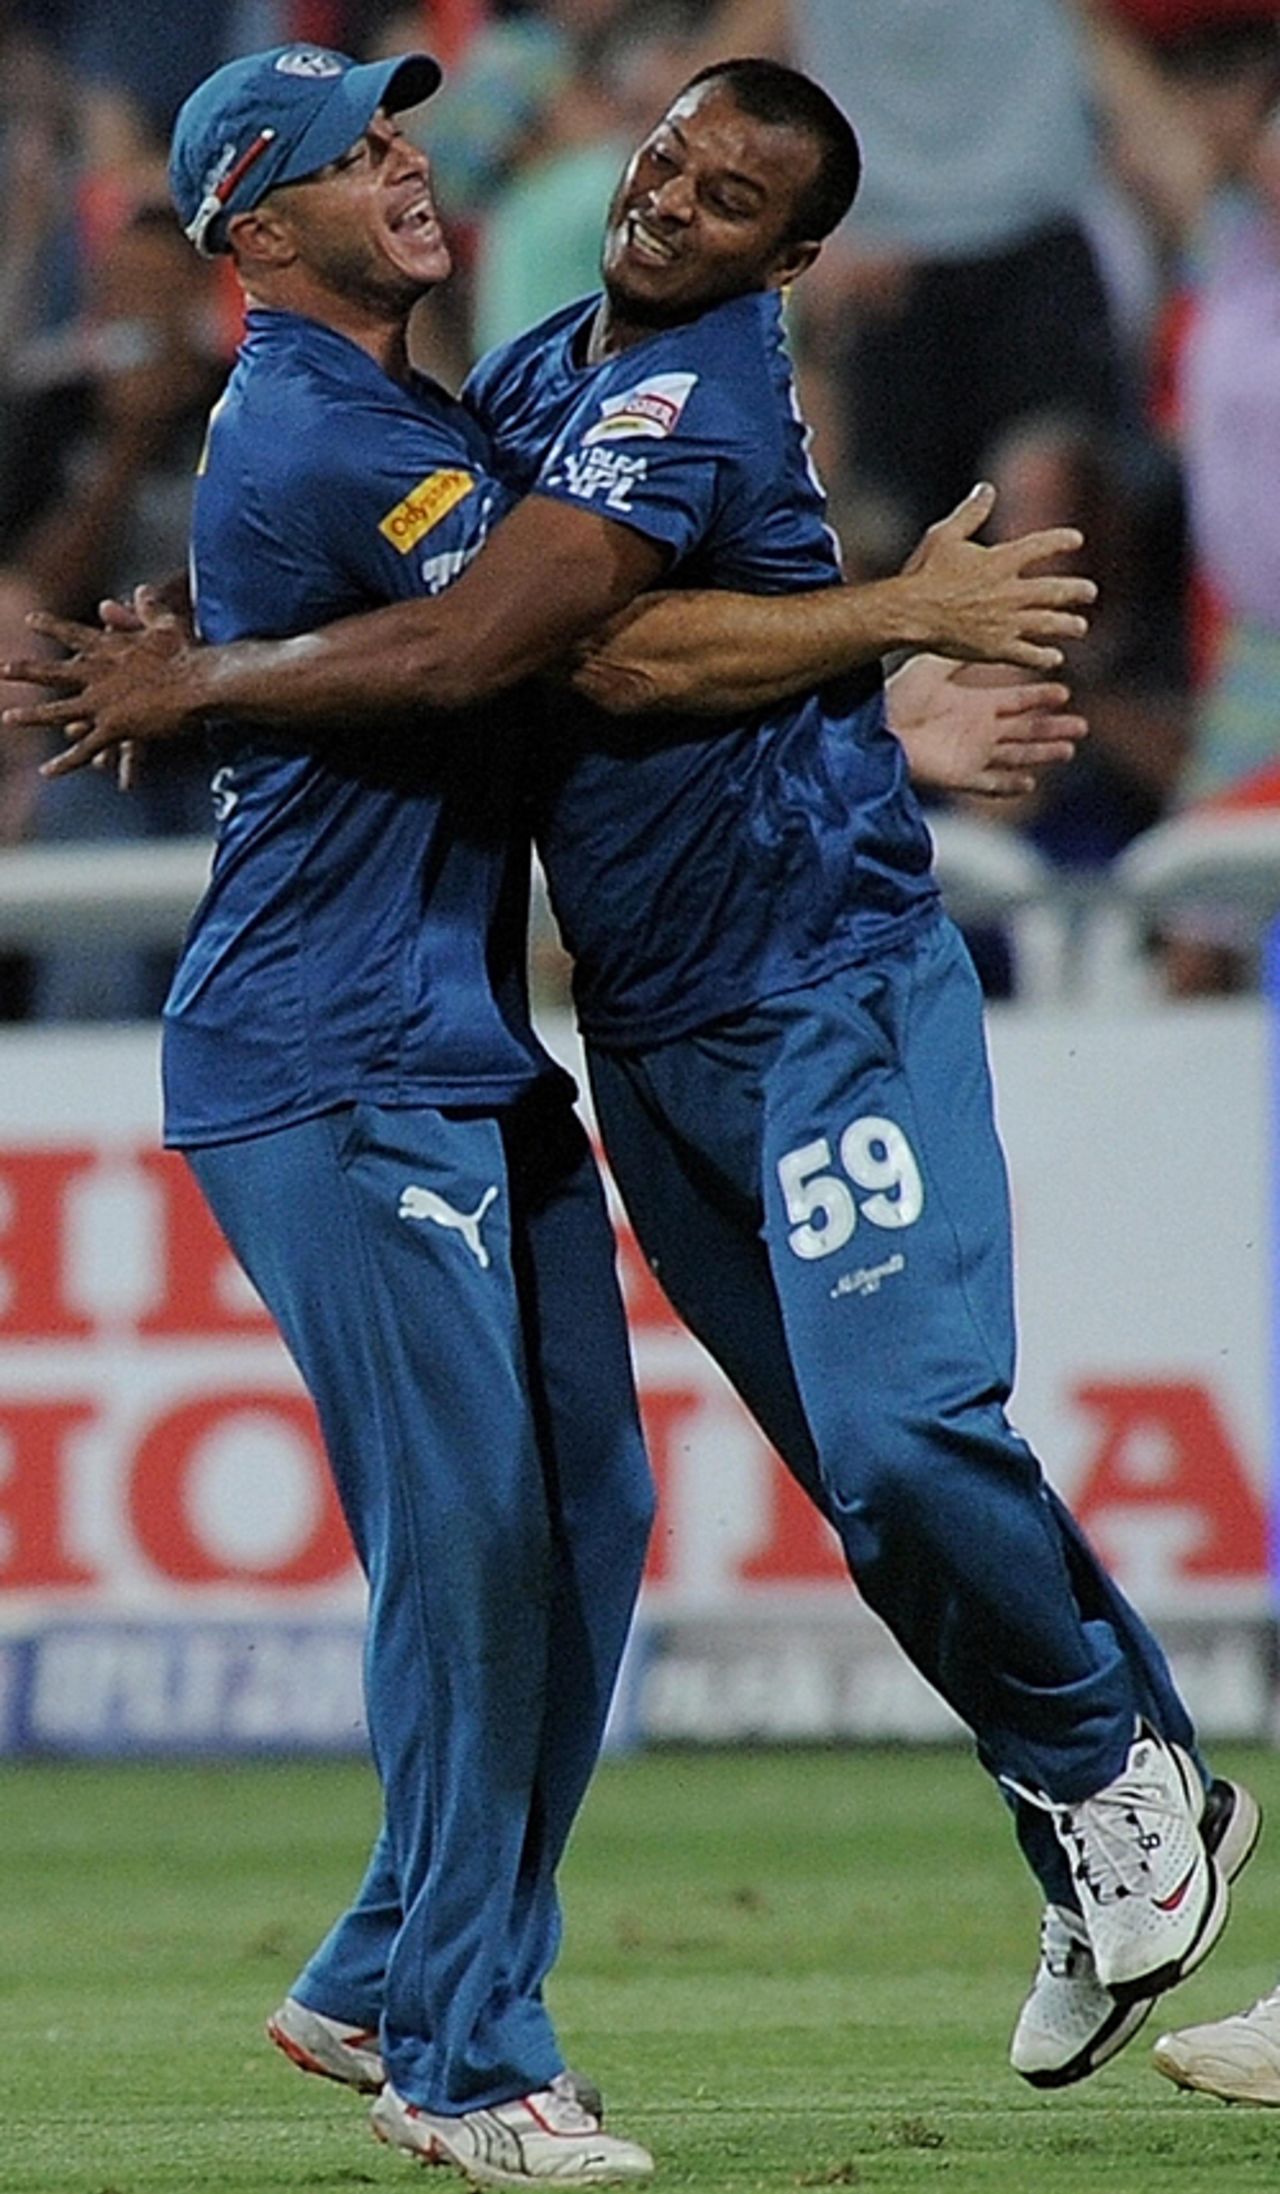 Herschelle Gibbs congratulates Dwaraka Ravi Teja on taking a stunner to dismiss Robin Uthappa, Bangalore Royal Challengers v Deccan Chargers, IPL, 8th game, Cape Town, April 22, 2009